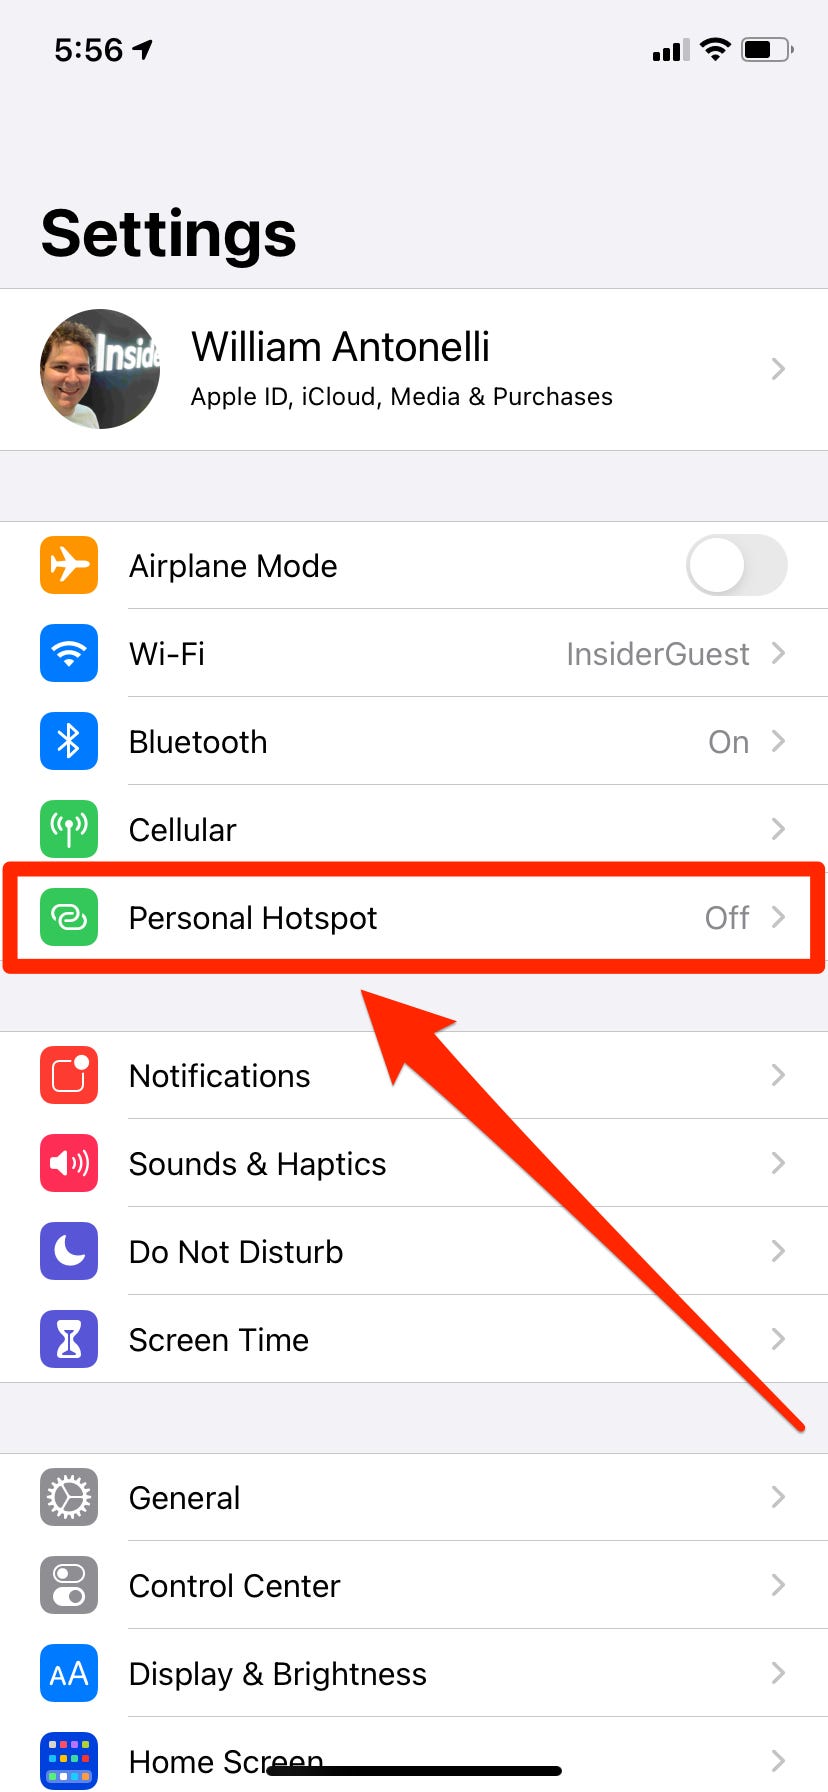 iphone settings with personal hotspot selected